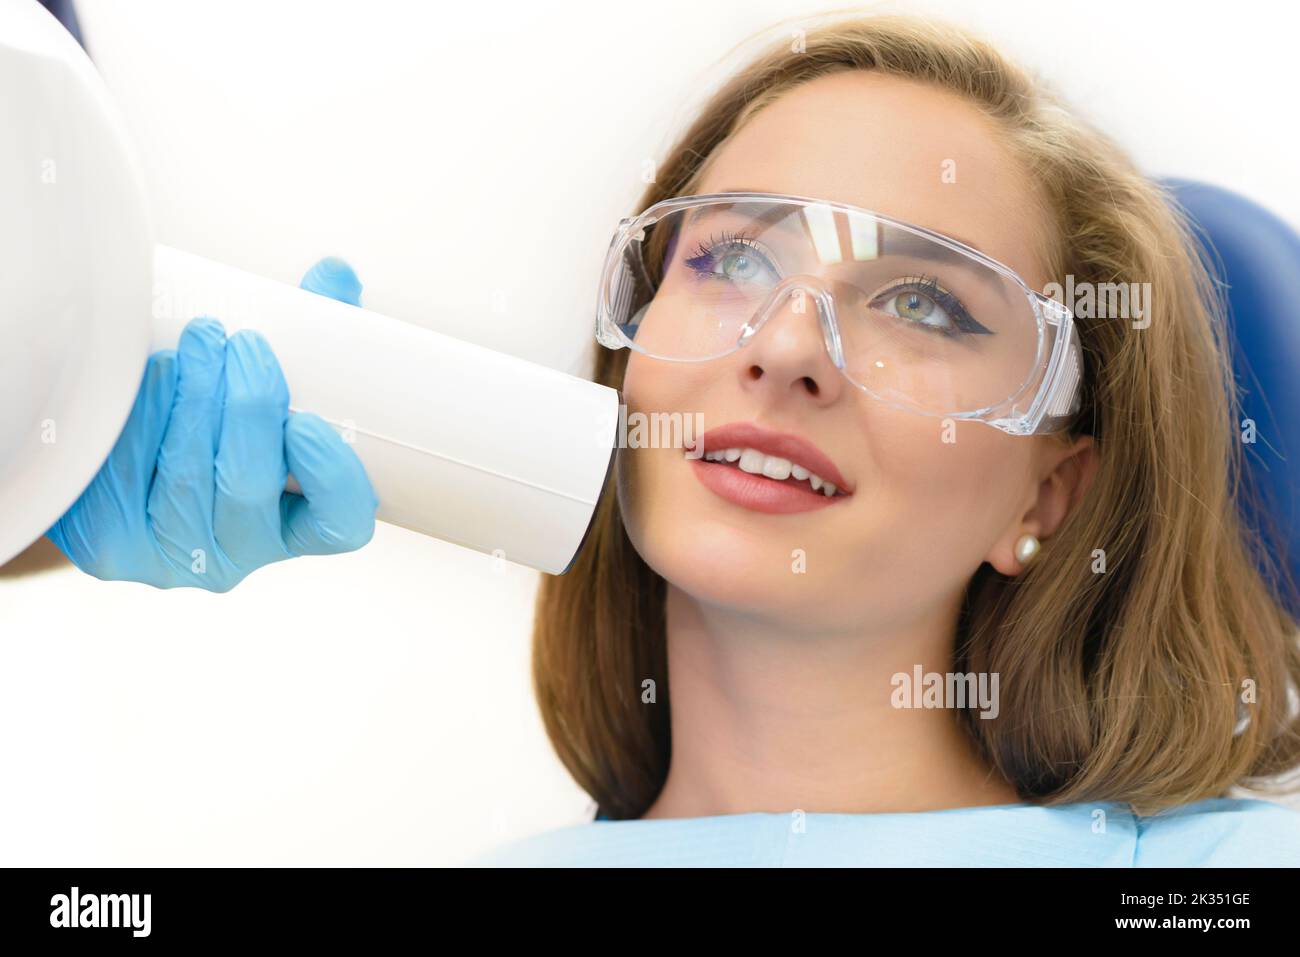 Beautiful young woman patient getting dental radiography. Dentist doctor using radiology equipment. Stock Photo